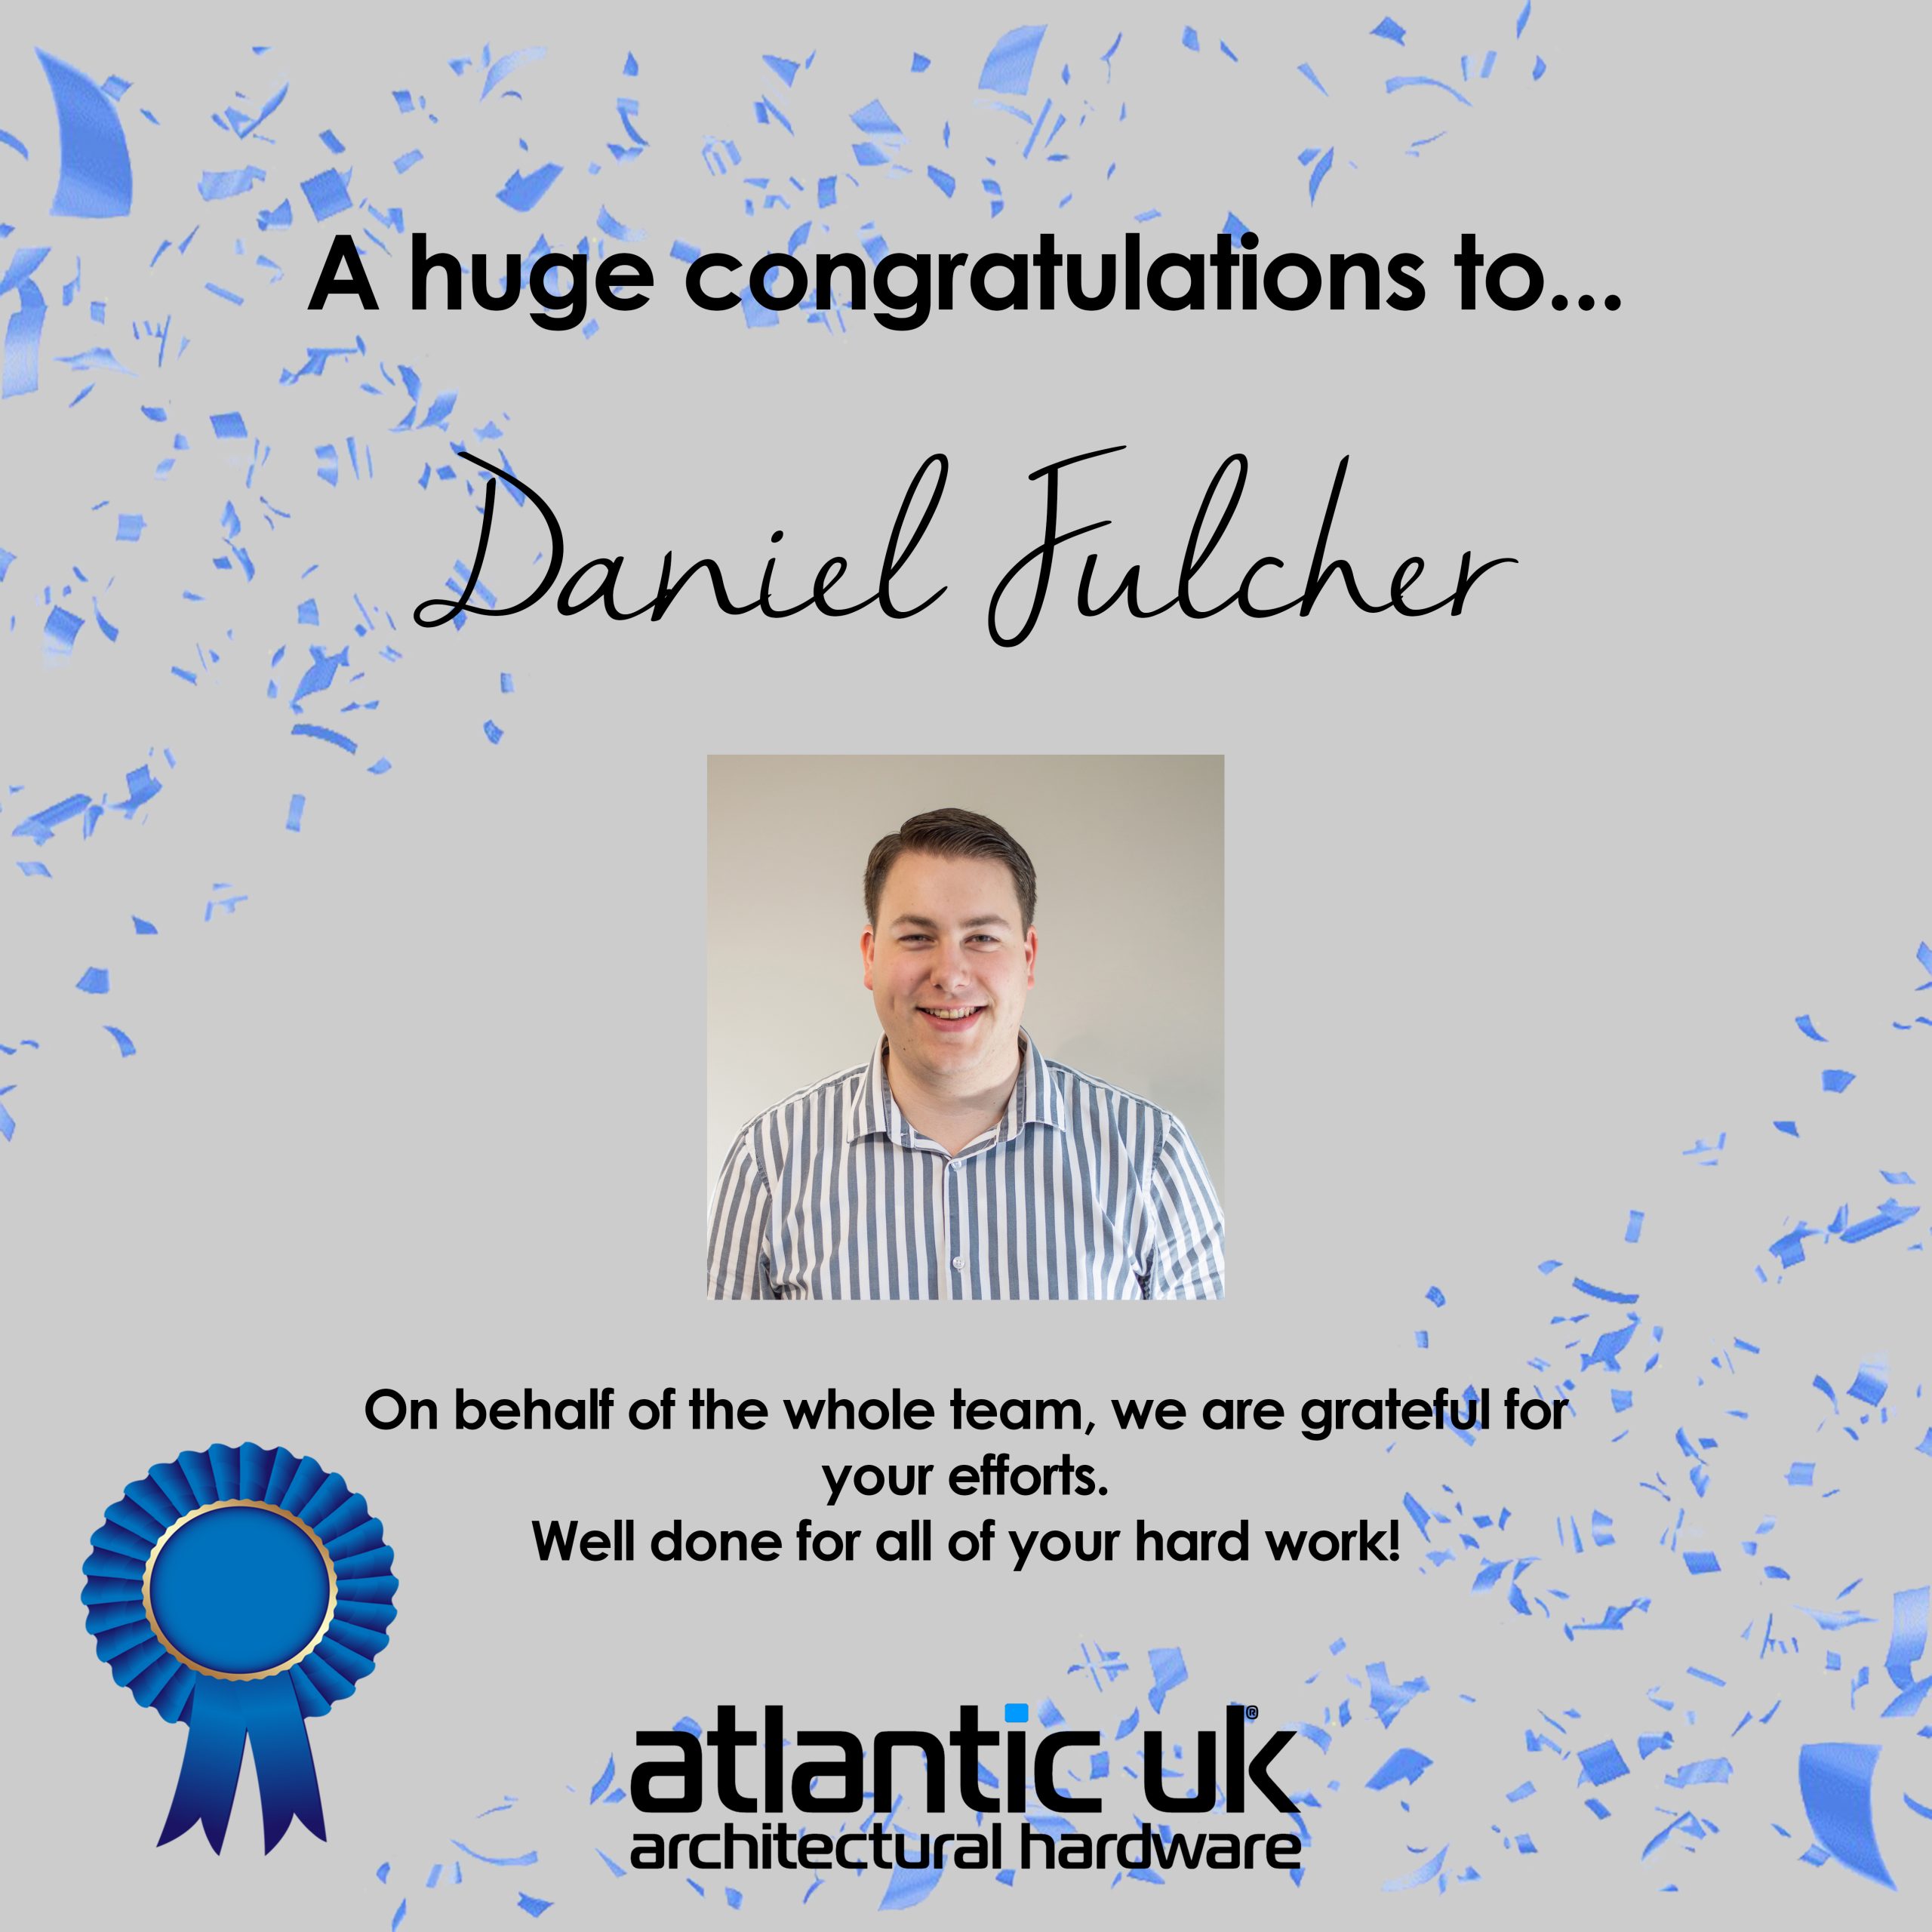 Congratulations Dan!  Employee of the Month for January! image